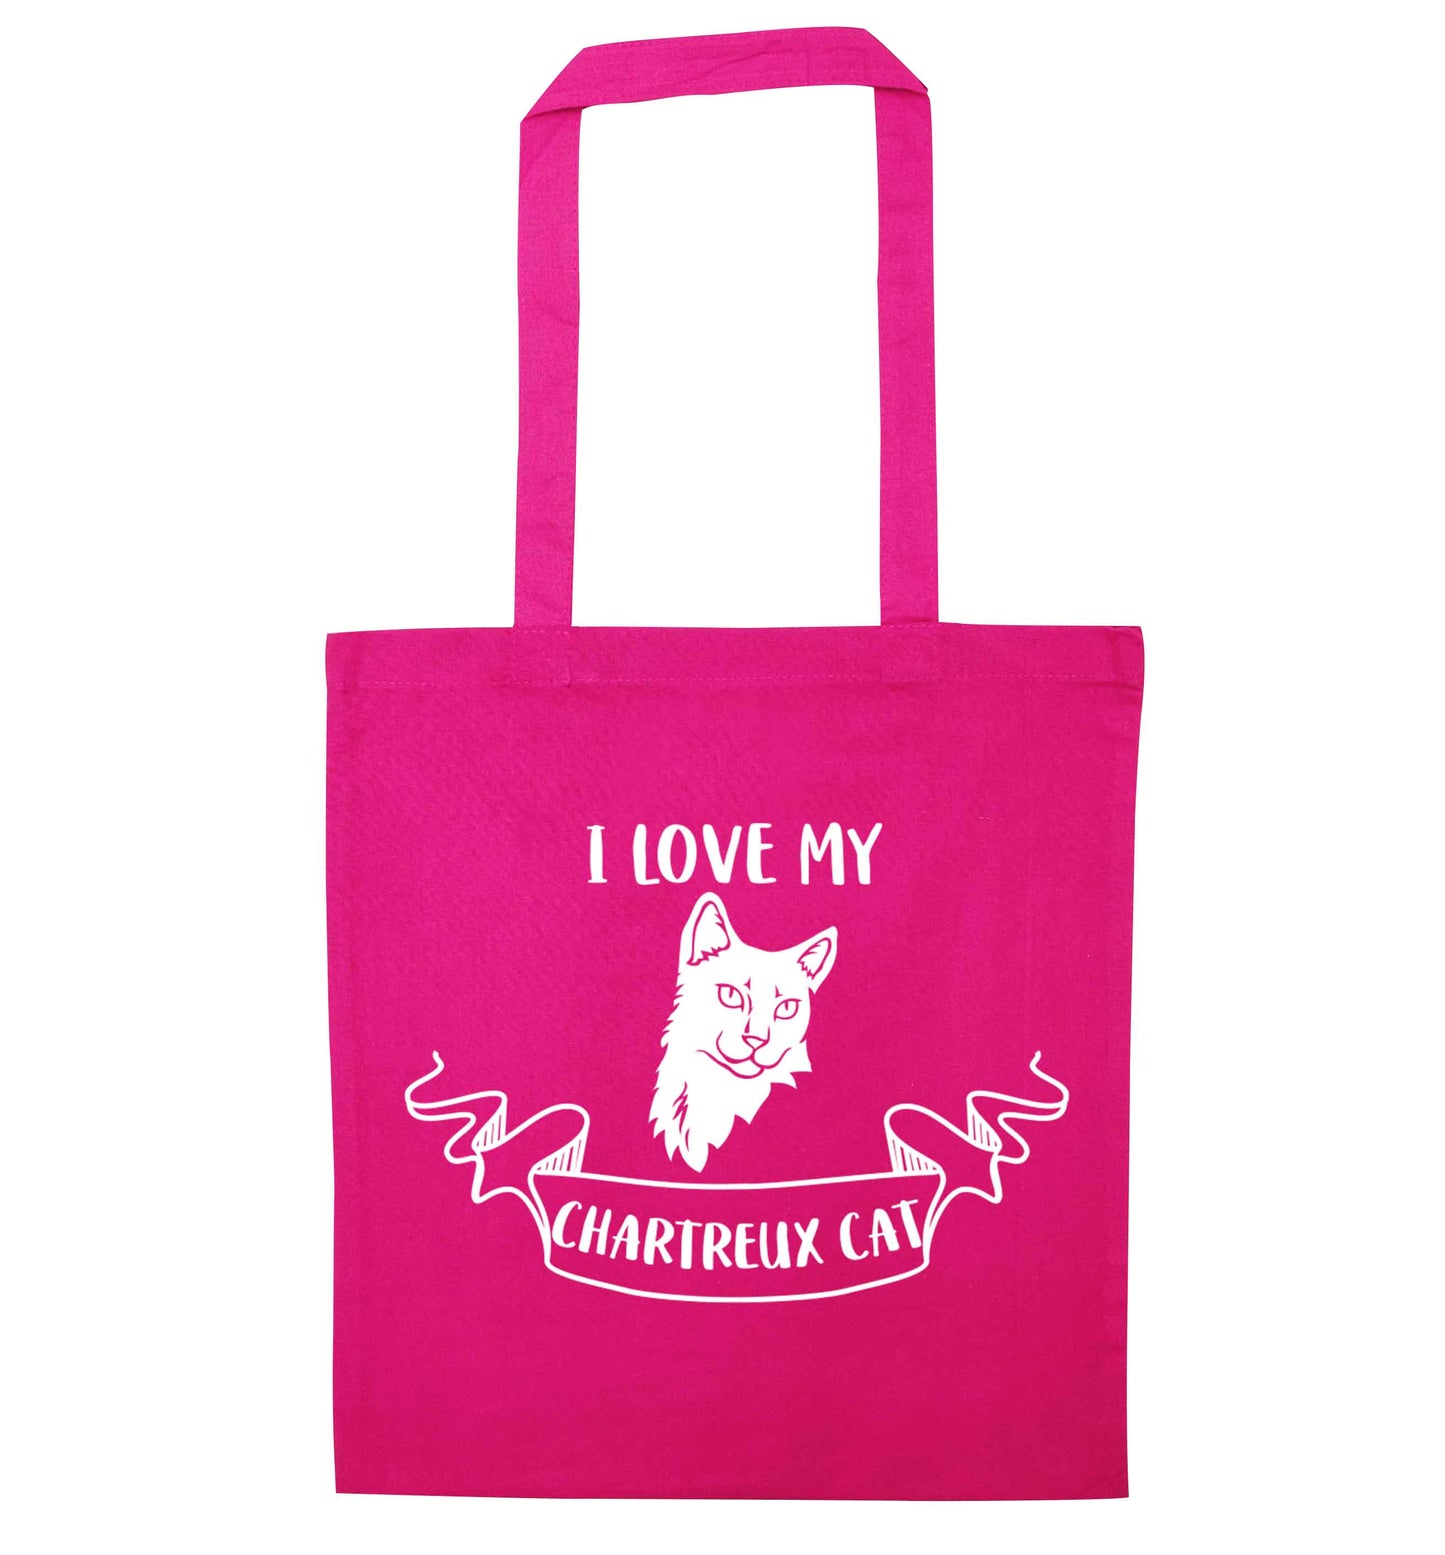 I love my chartreux cat pink tote bag